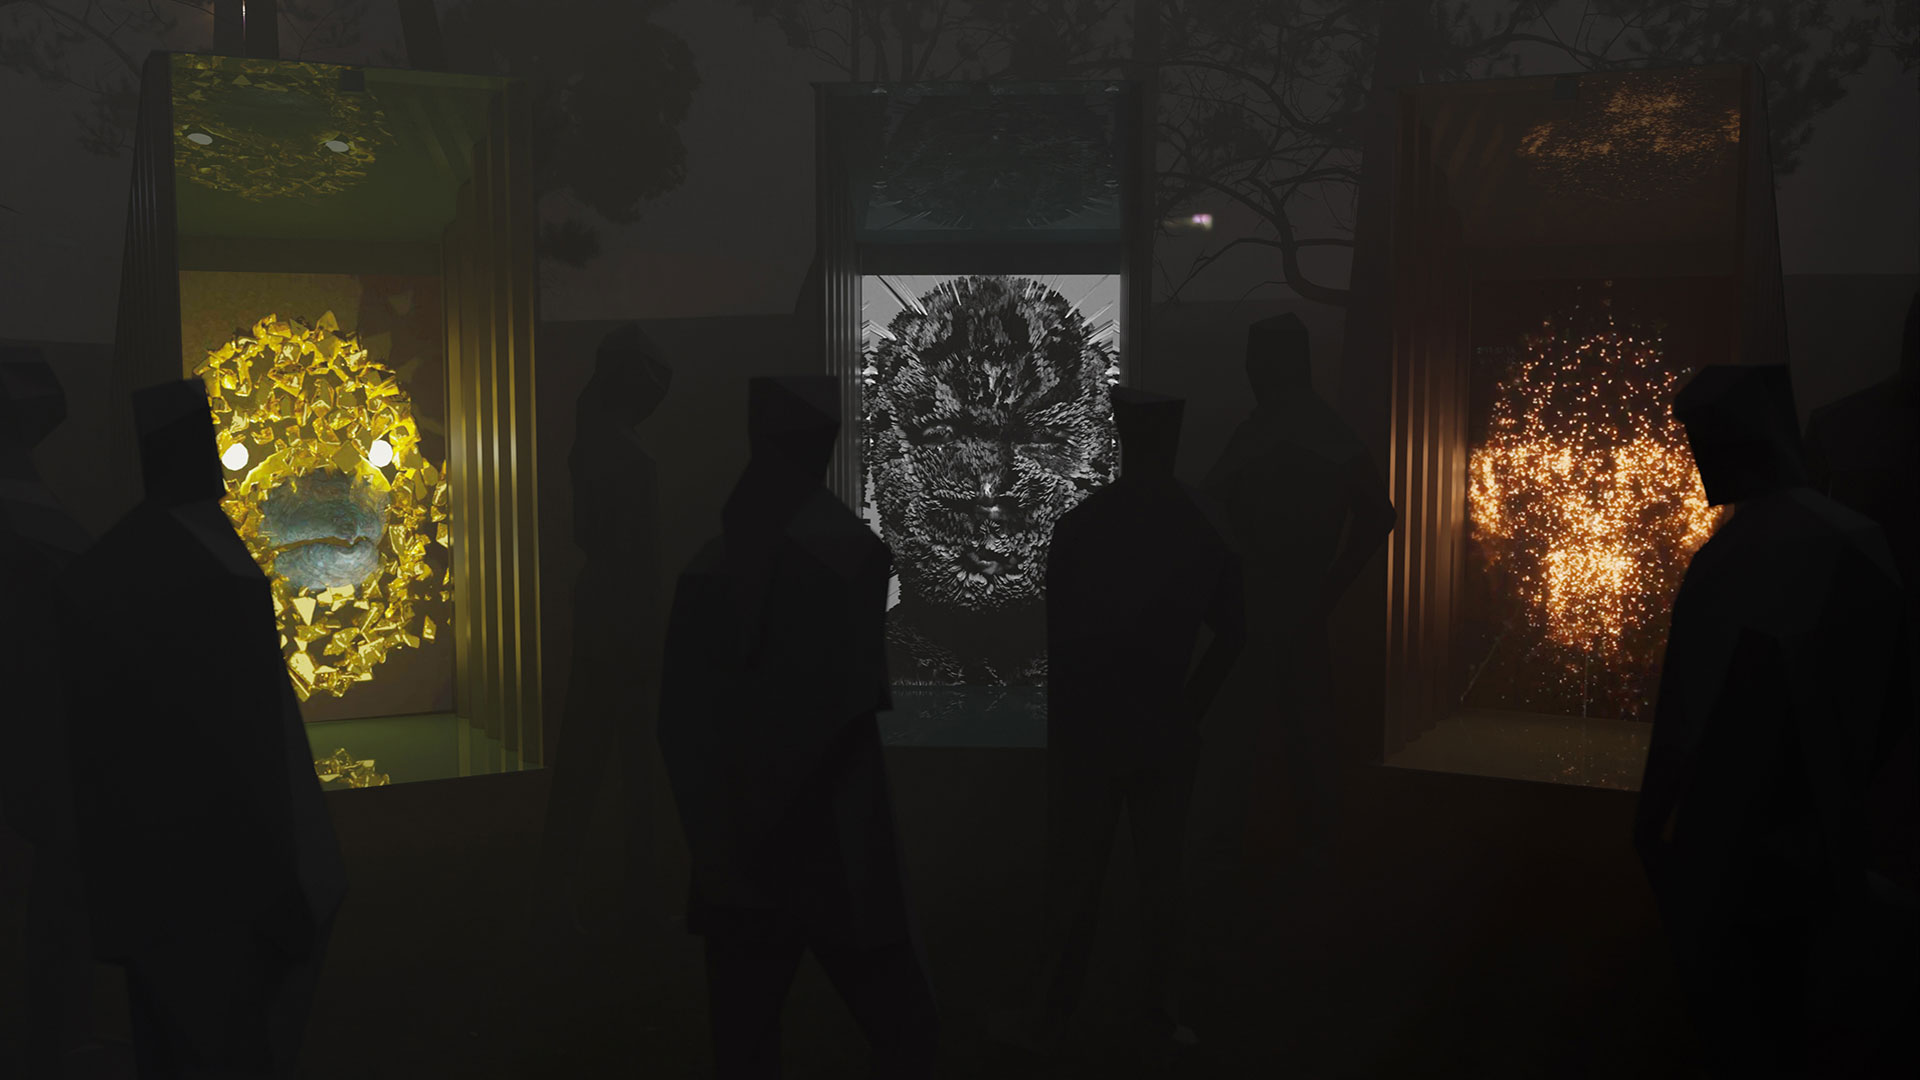 In a dark computer-generated scene, four cloaked human silhouettes appear in front of a multi-channel screen installation. 